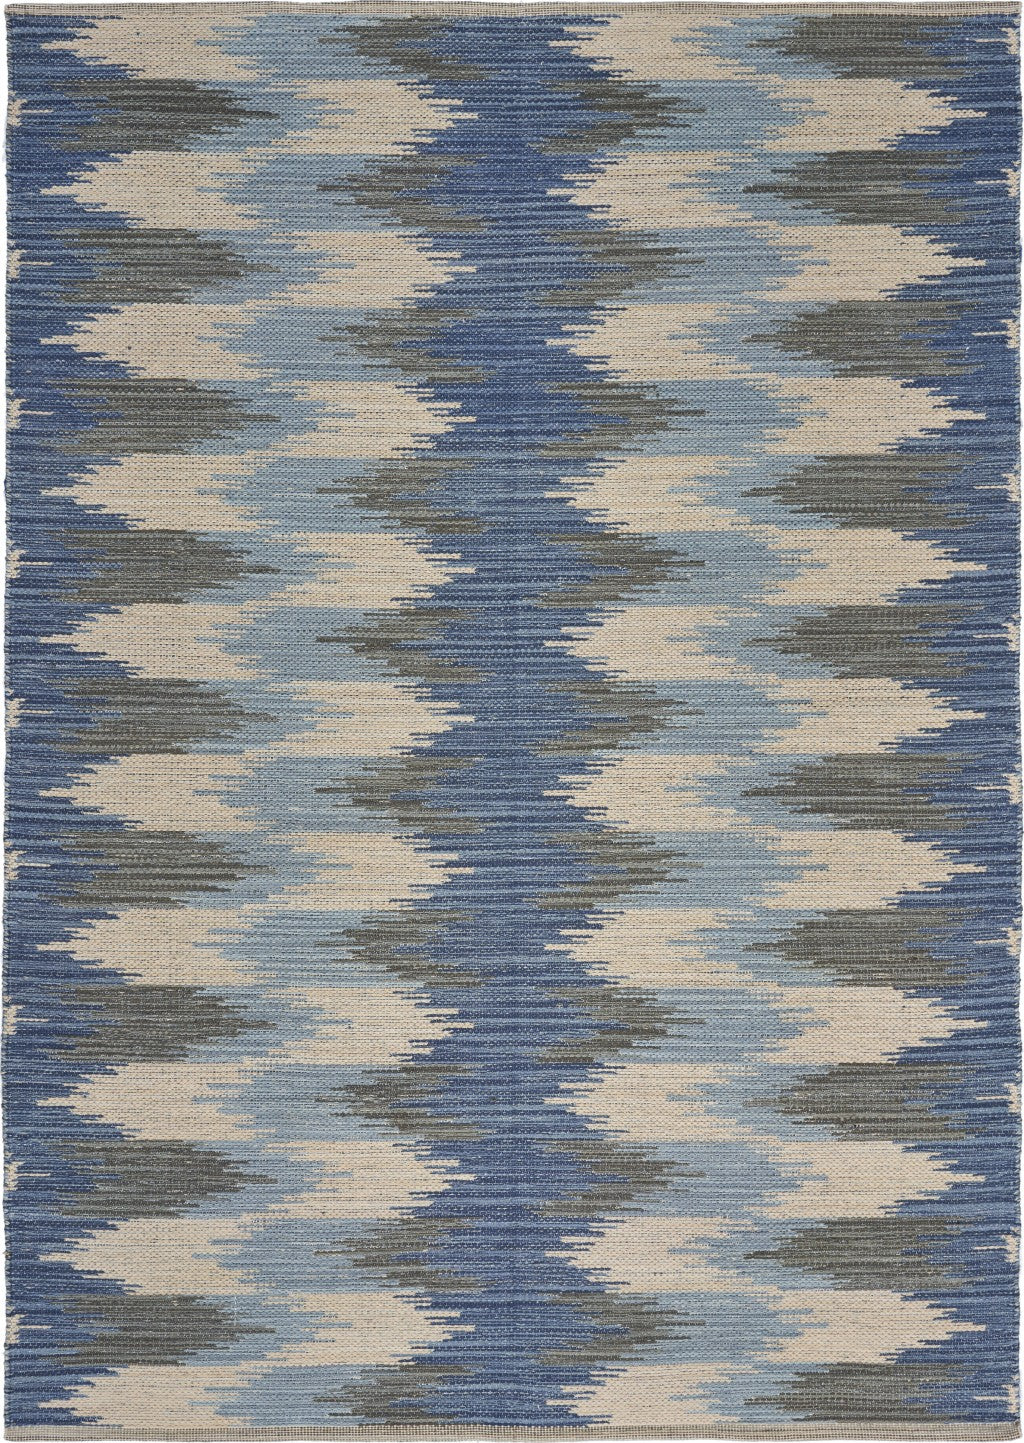 3’ x 5’ Blue and Cream Ikat Pattern Area Rug